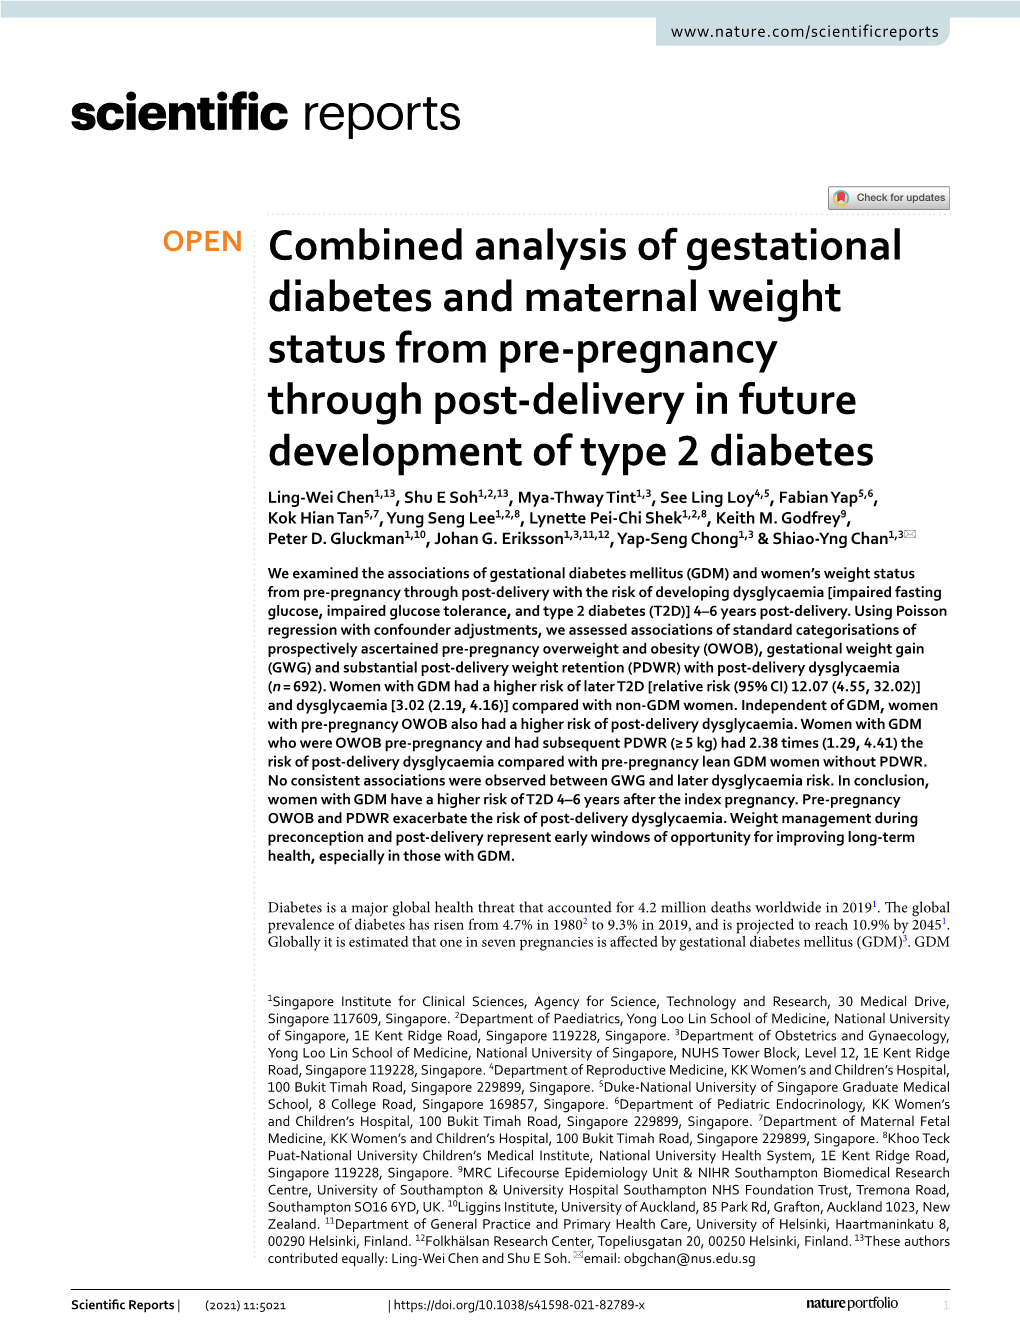 Combined Analysis of Gestational Diabetes and Maternal Weight